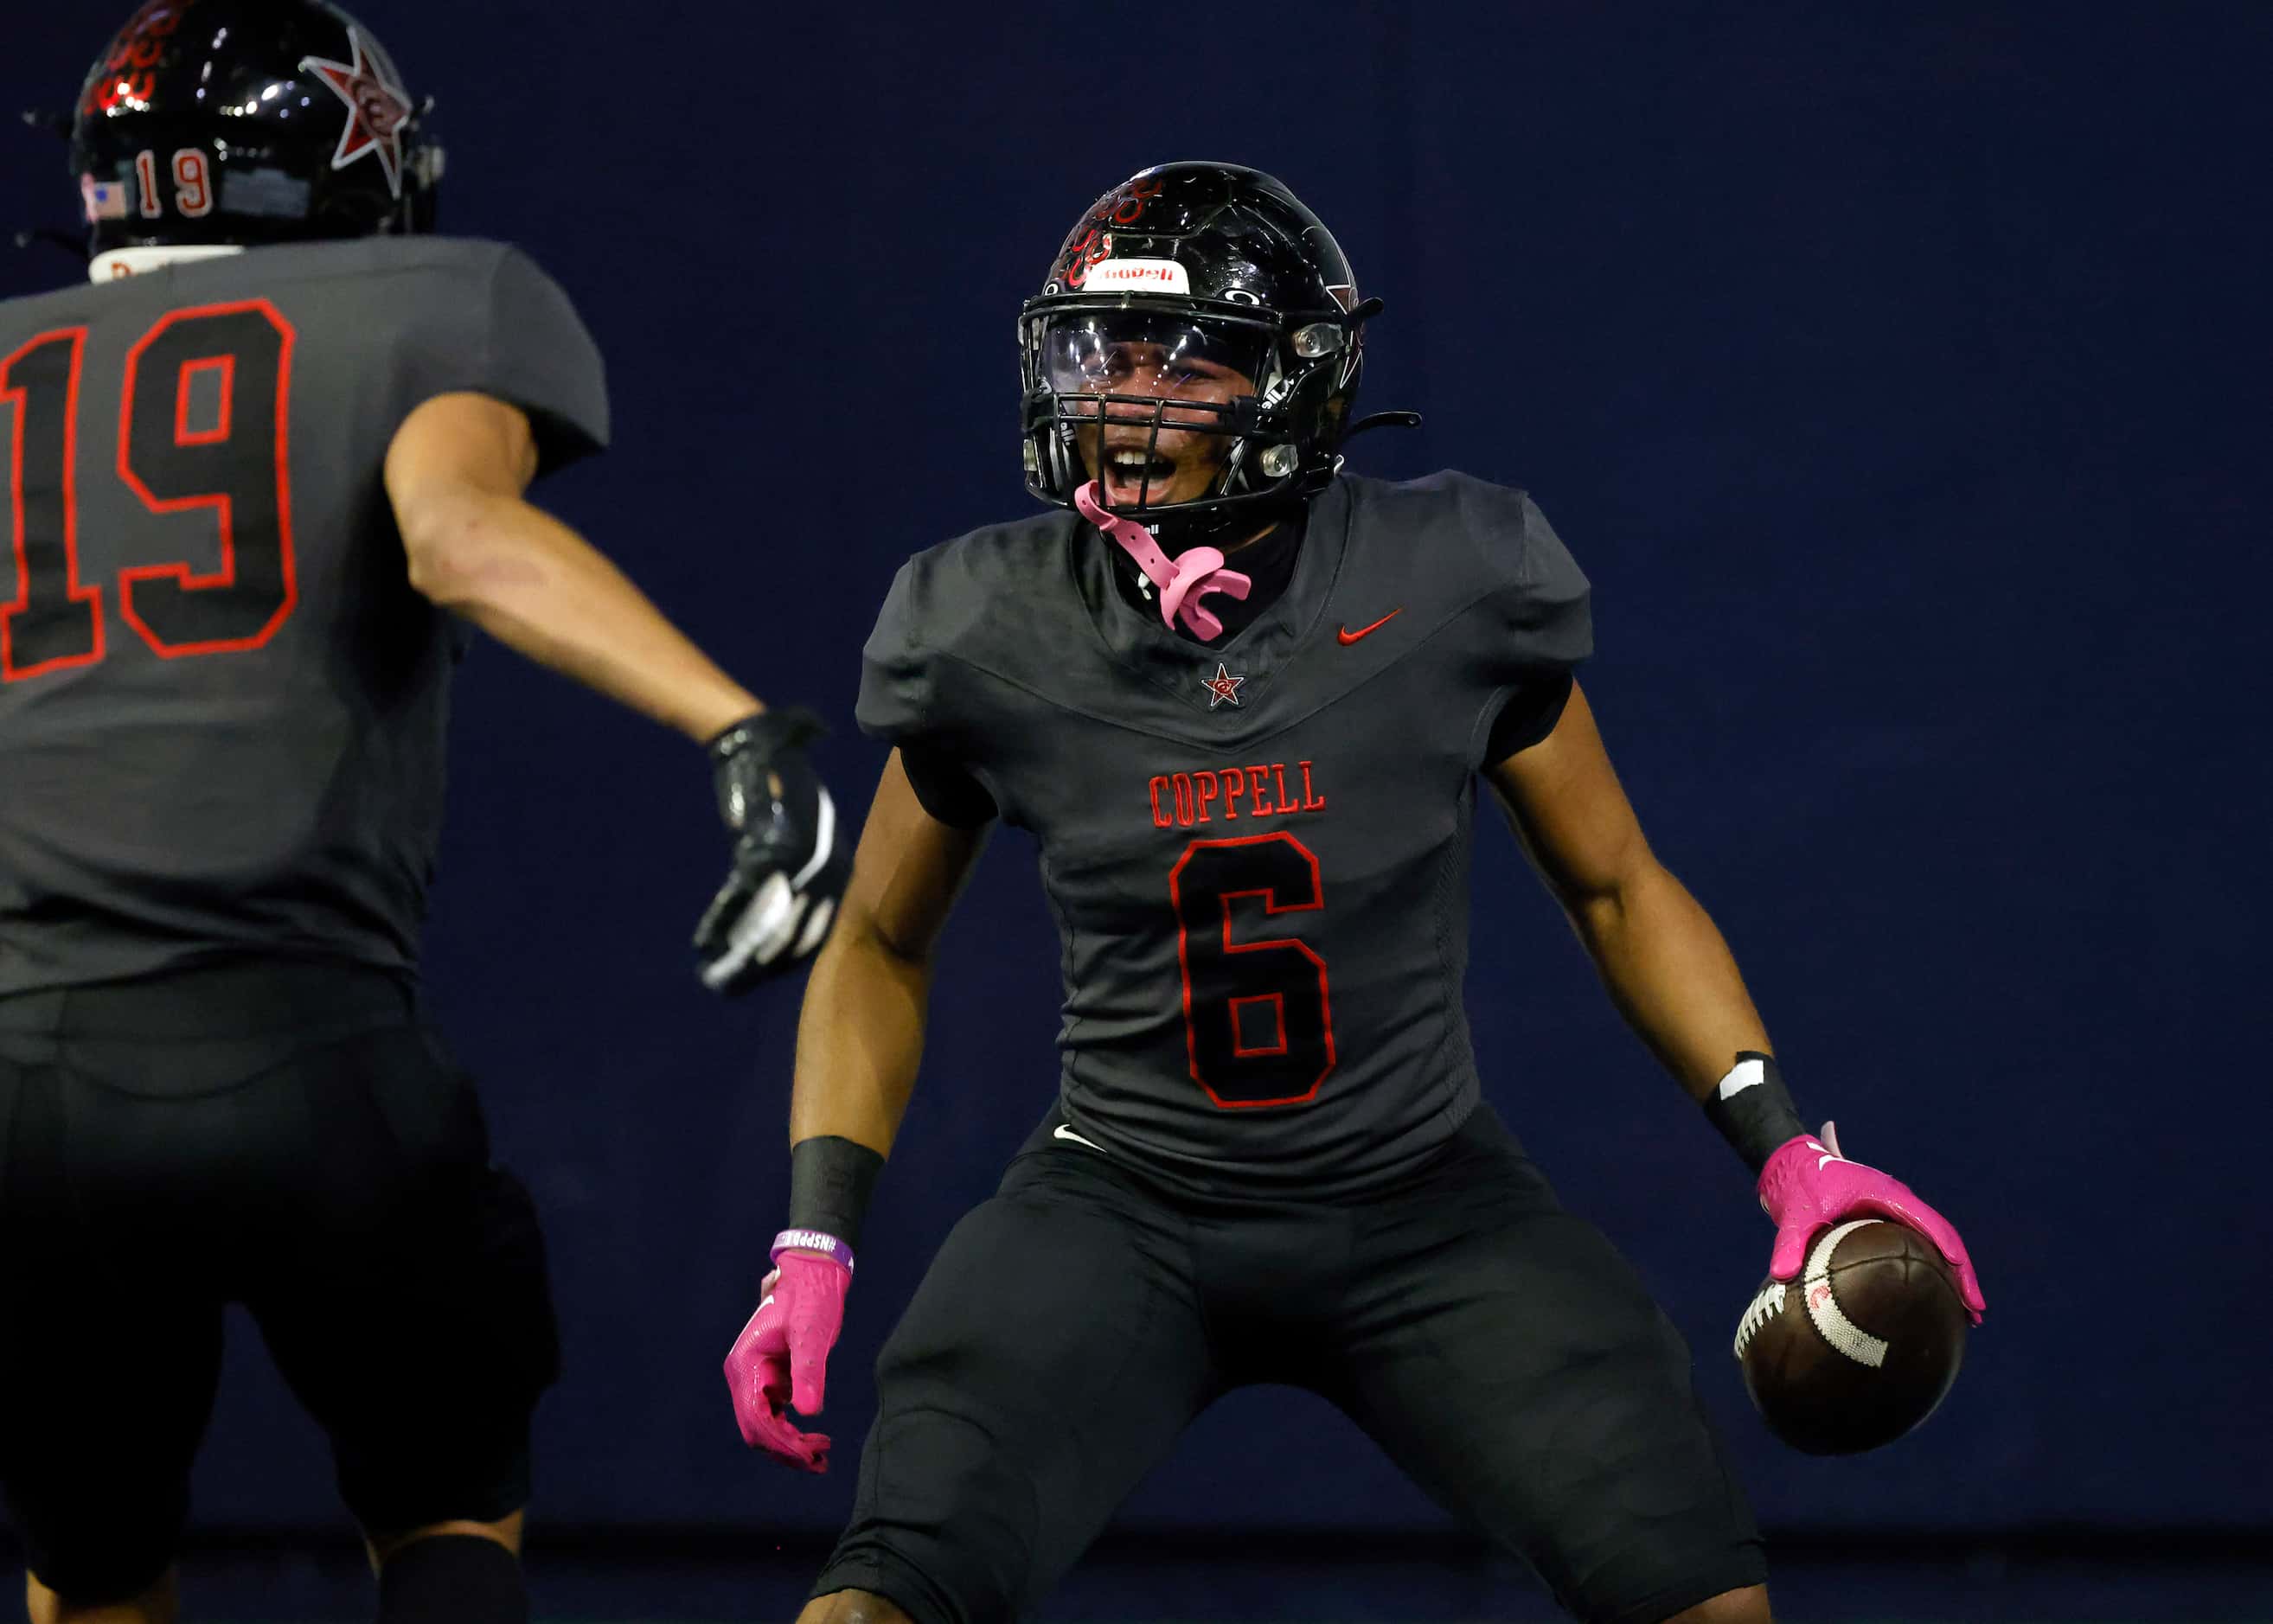 Coppell running back O’Marion Mbakwe (6) celebrates his fourth quarter touchdown run against...